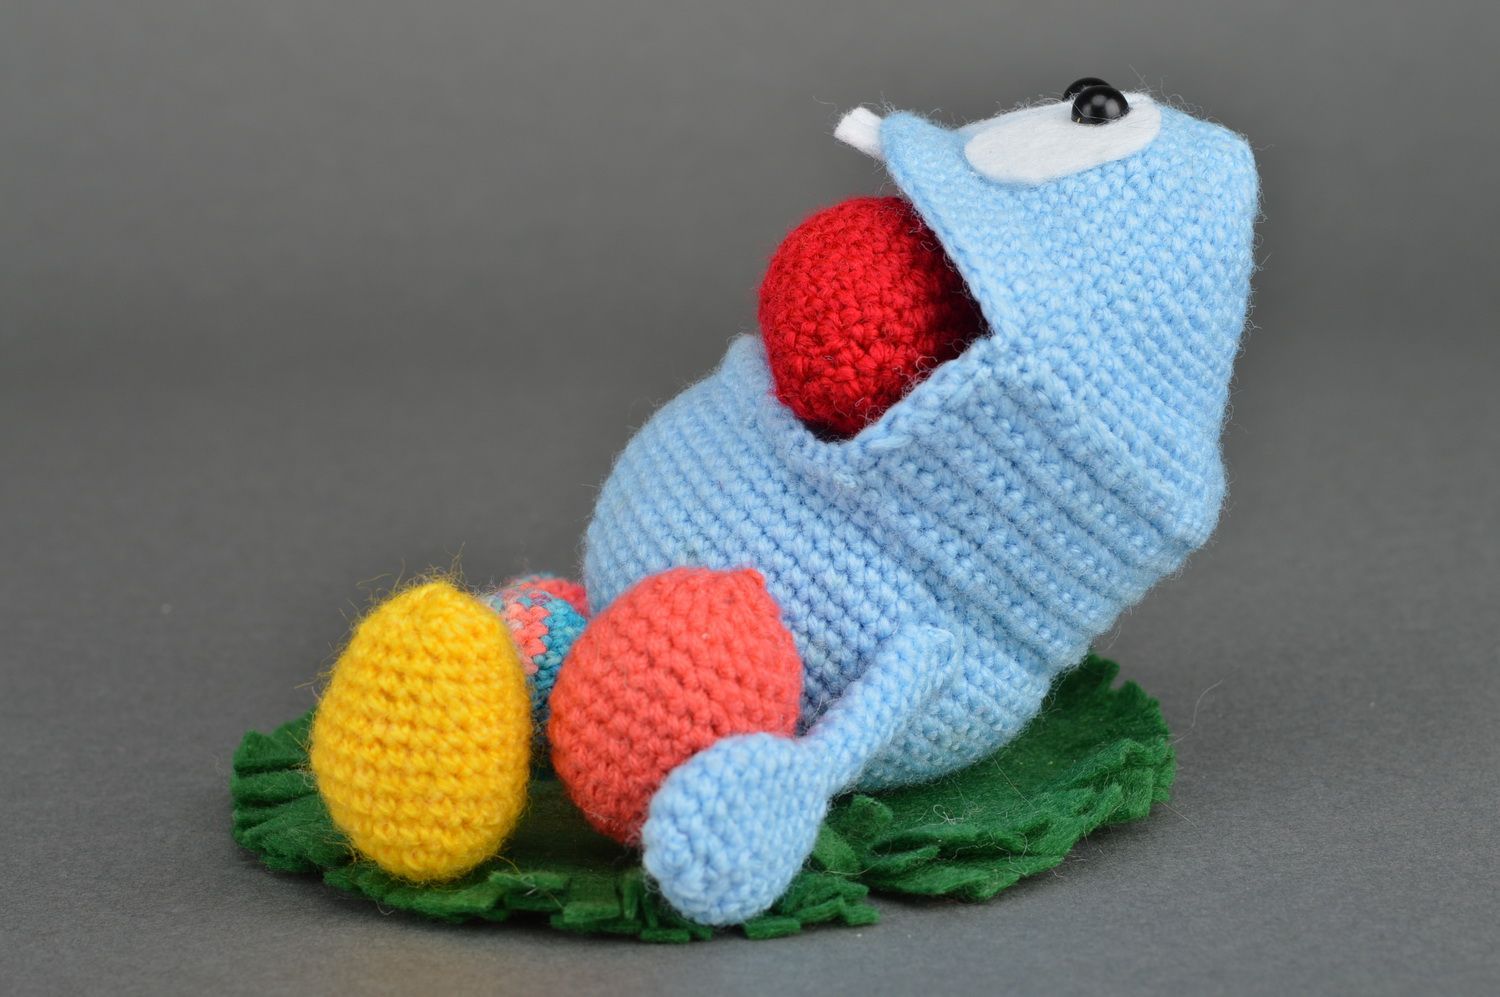 Handmade small crocheted soft toy blue funny creature for kids over 3 years old photo 5